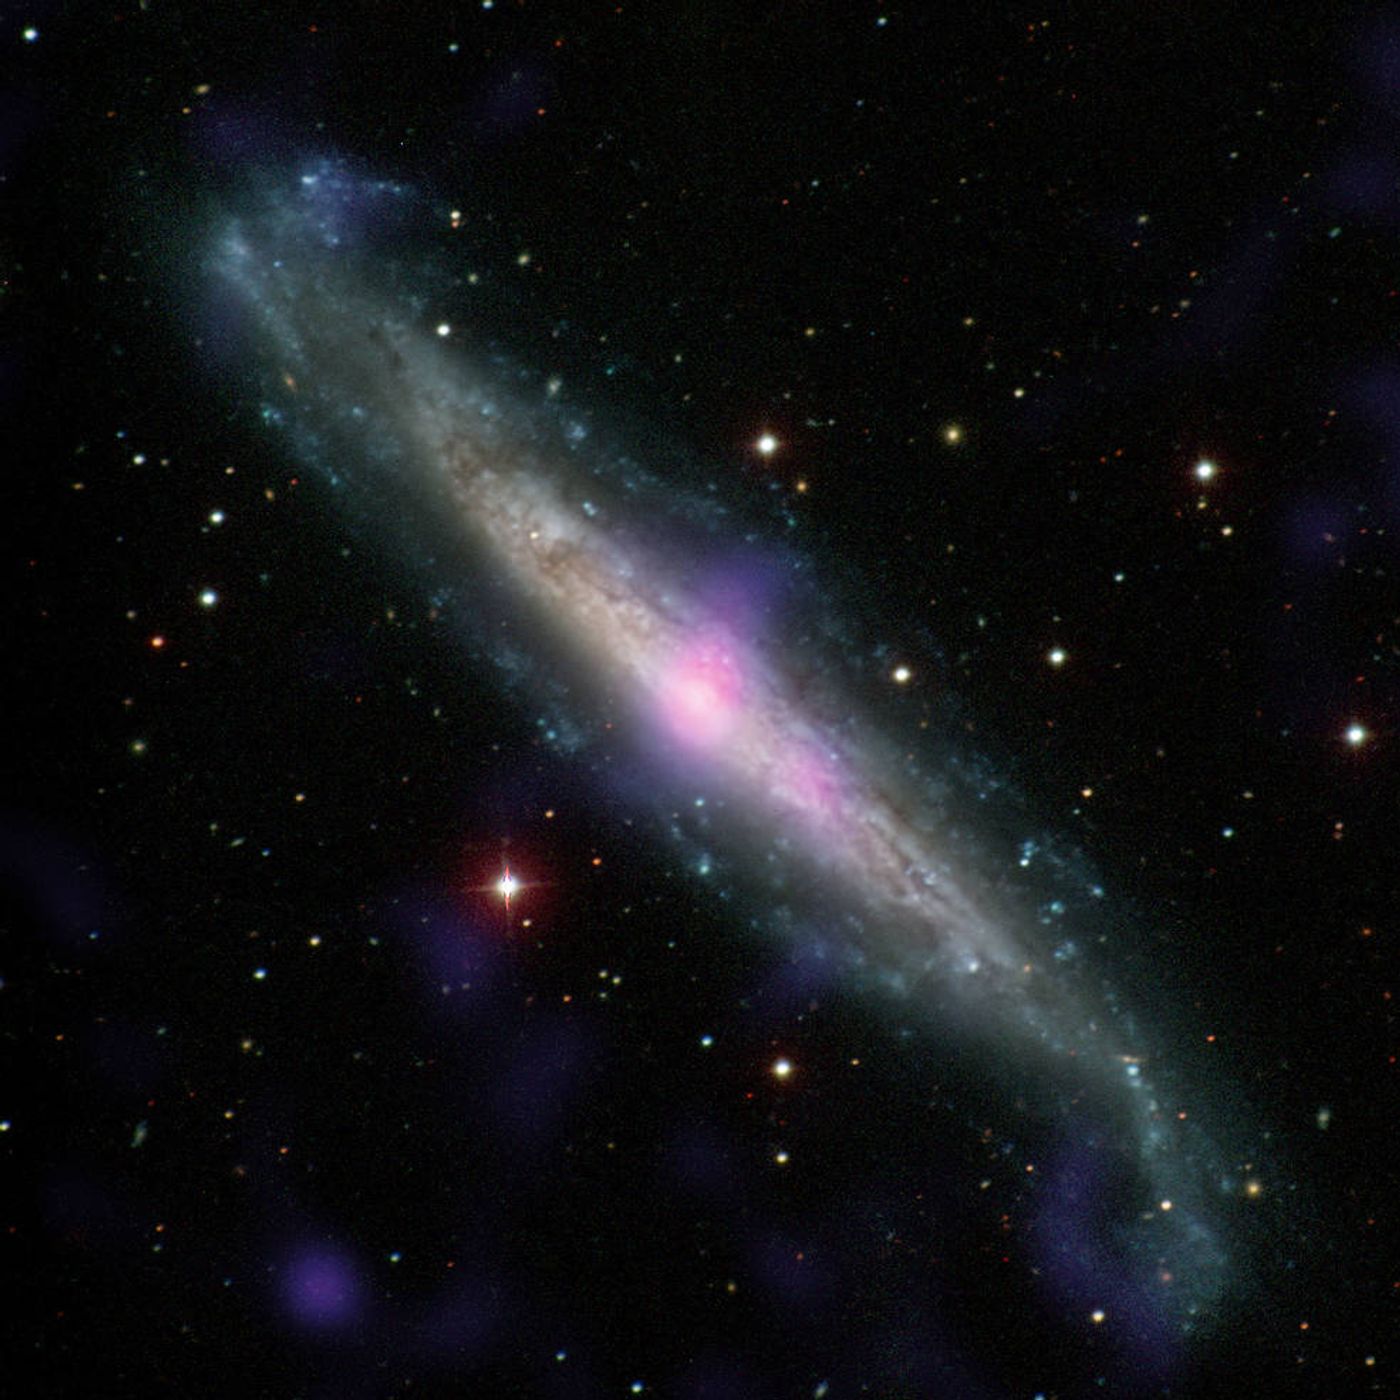 NGC 1448 is one of the galaxies housing a once-hidden supermassive black hole.